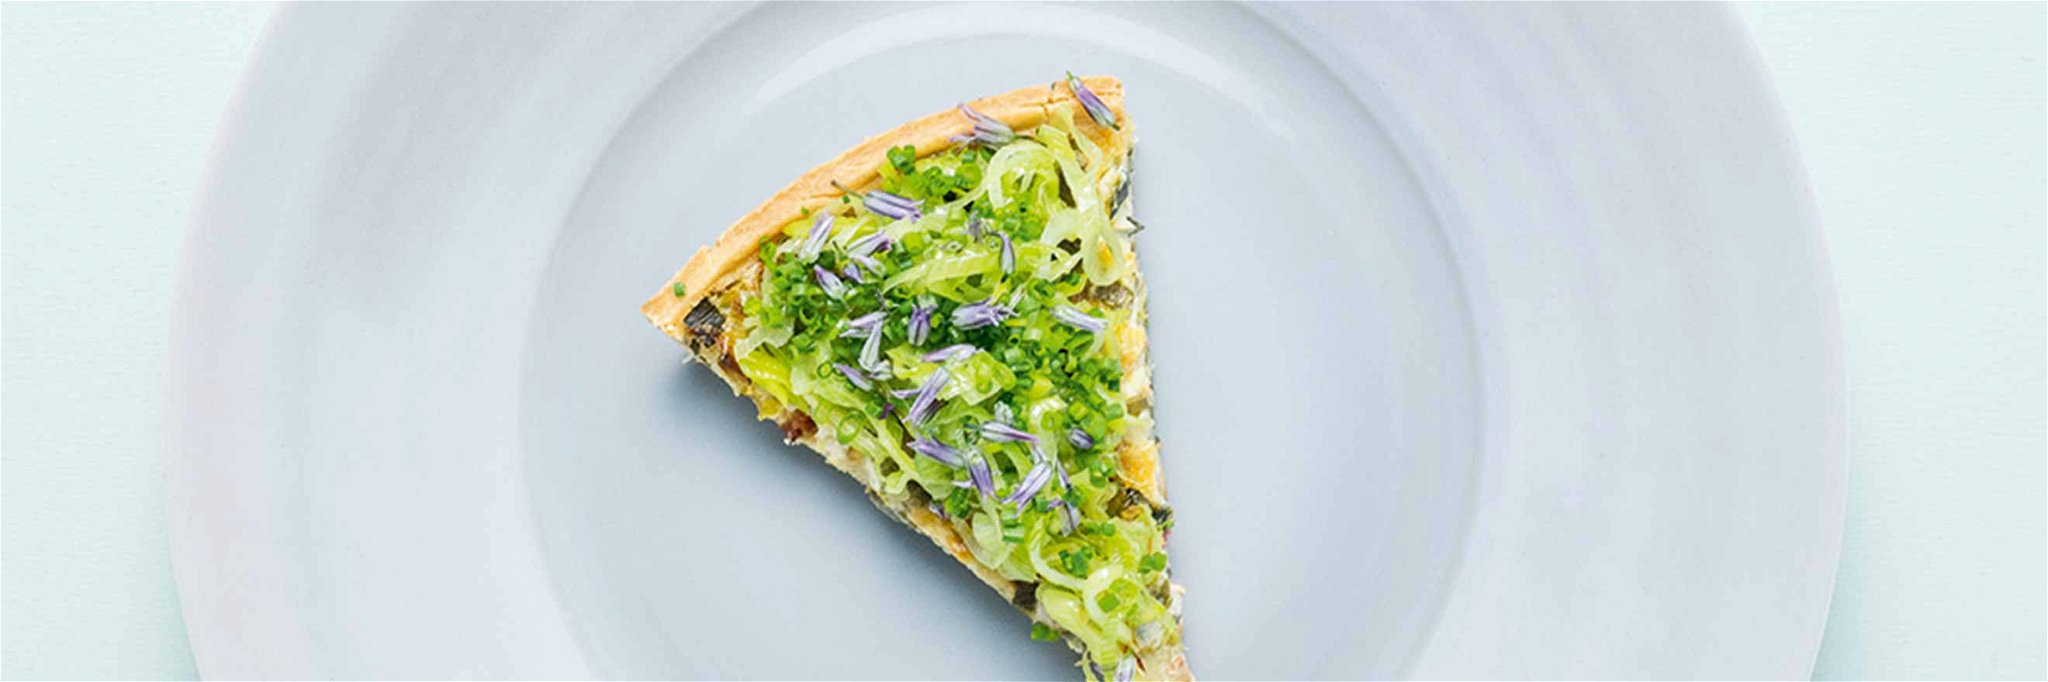 Leek Quiche with Chives